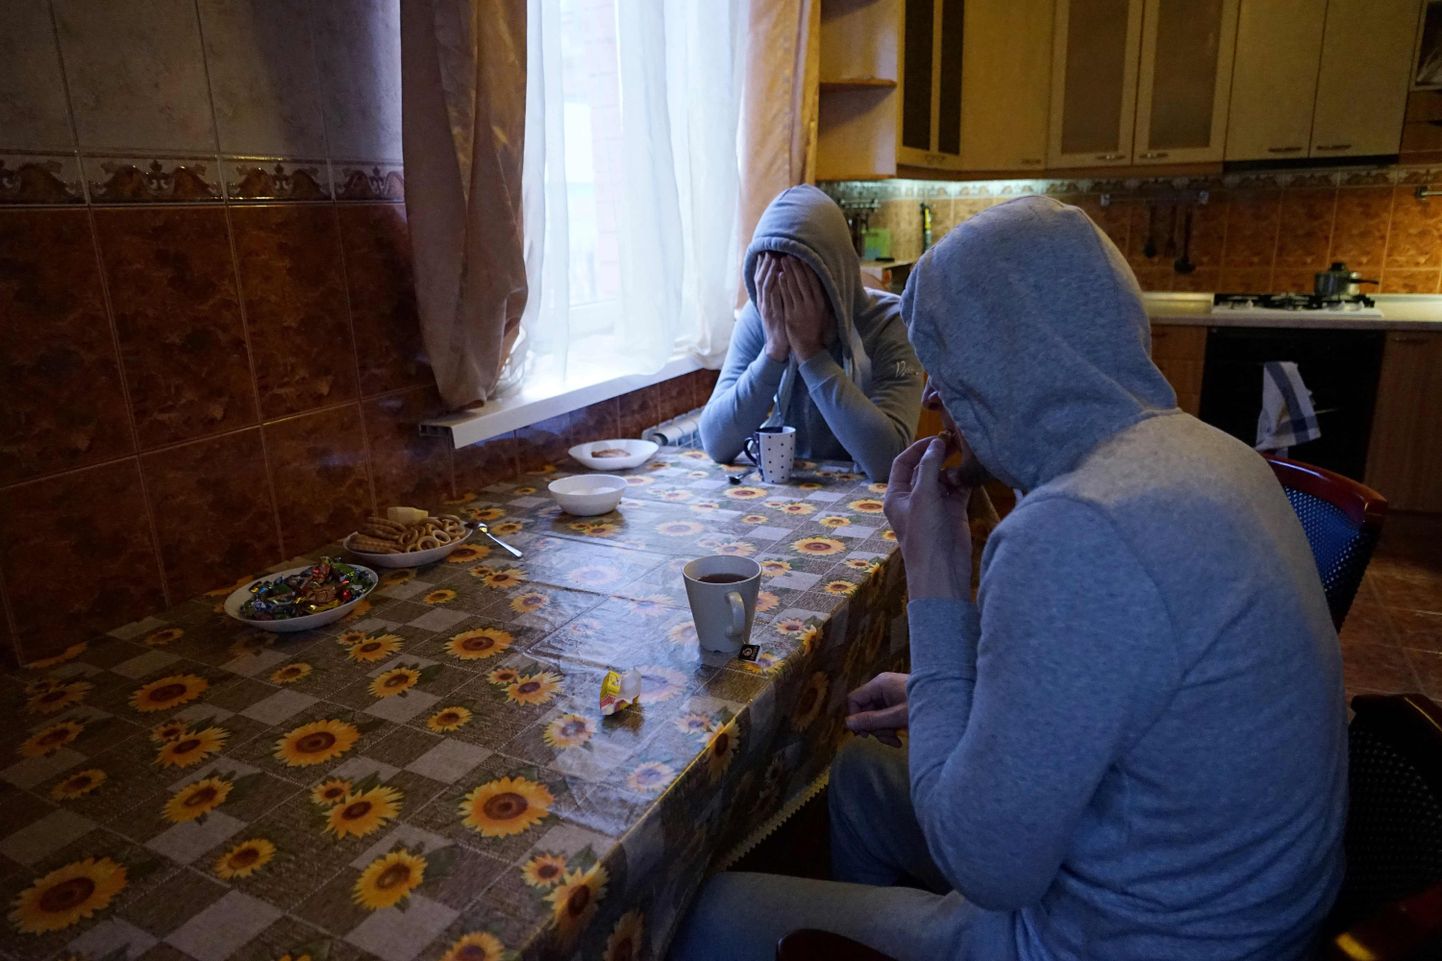 Chechen gay men who fled persecution in their home Russia's Muslim region of Chechnya due to his sexual-orientation, sits around a table in their flat in Moscow on April 17, 2017. / AFP PHOTO / Naira DAVLASHYAN / TO GO WITH AFP STORY BY Anais LLOBET